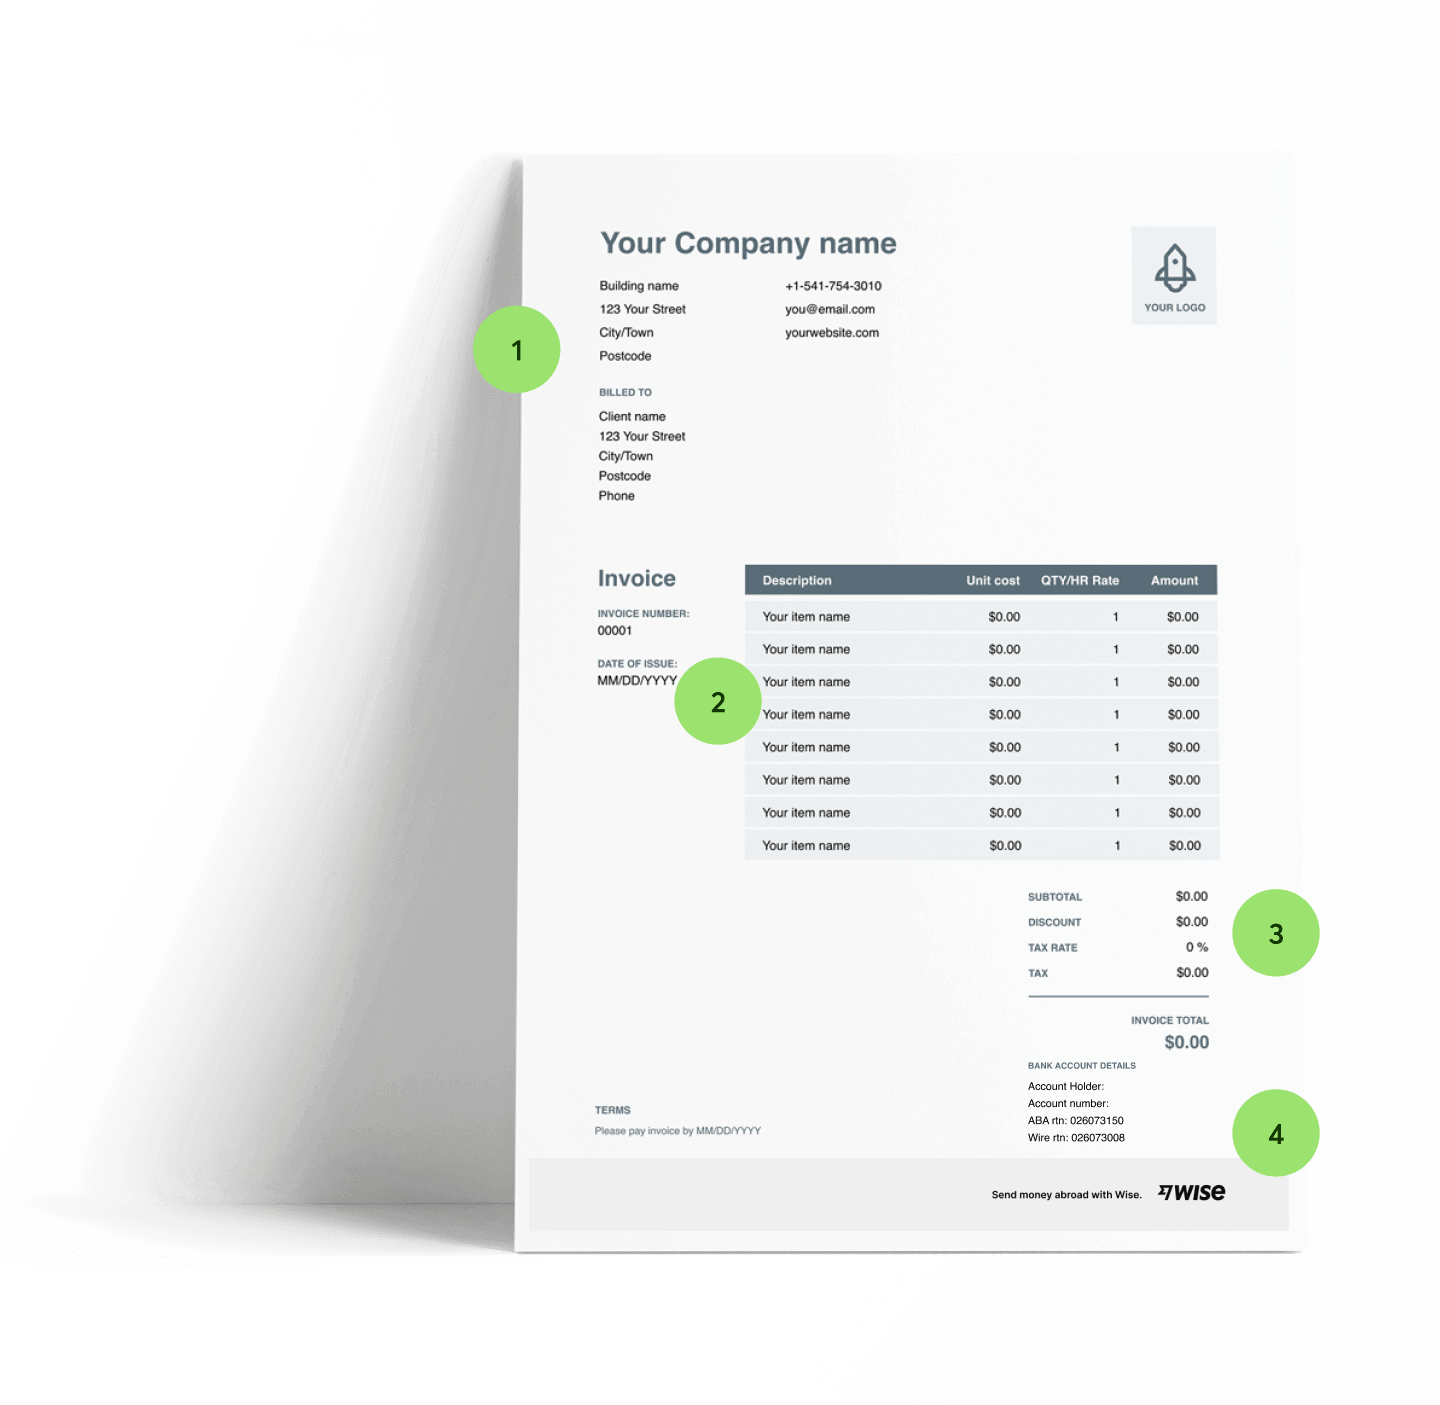 How to make an invoice?